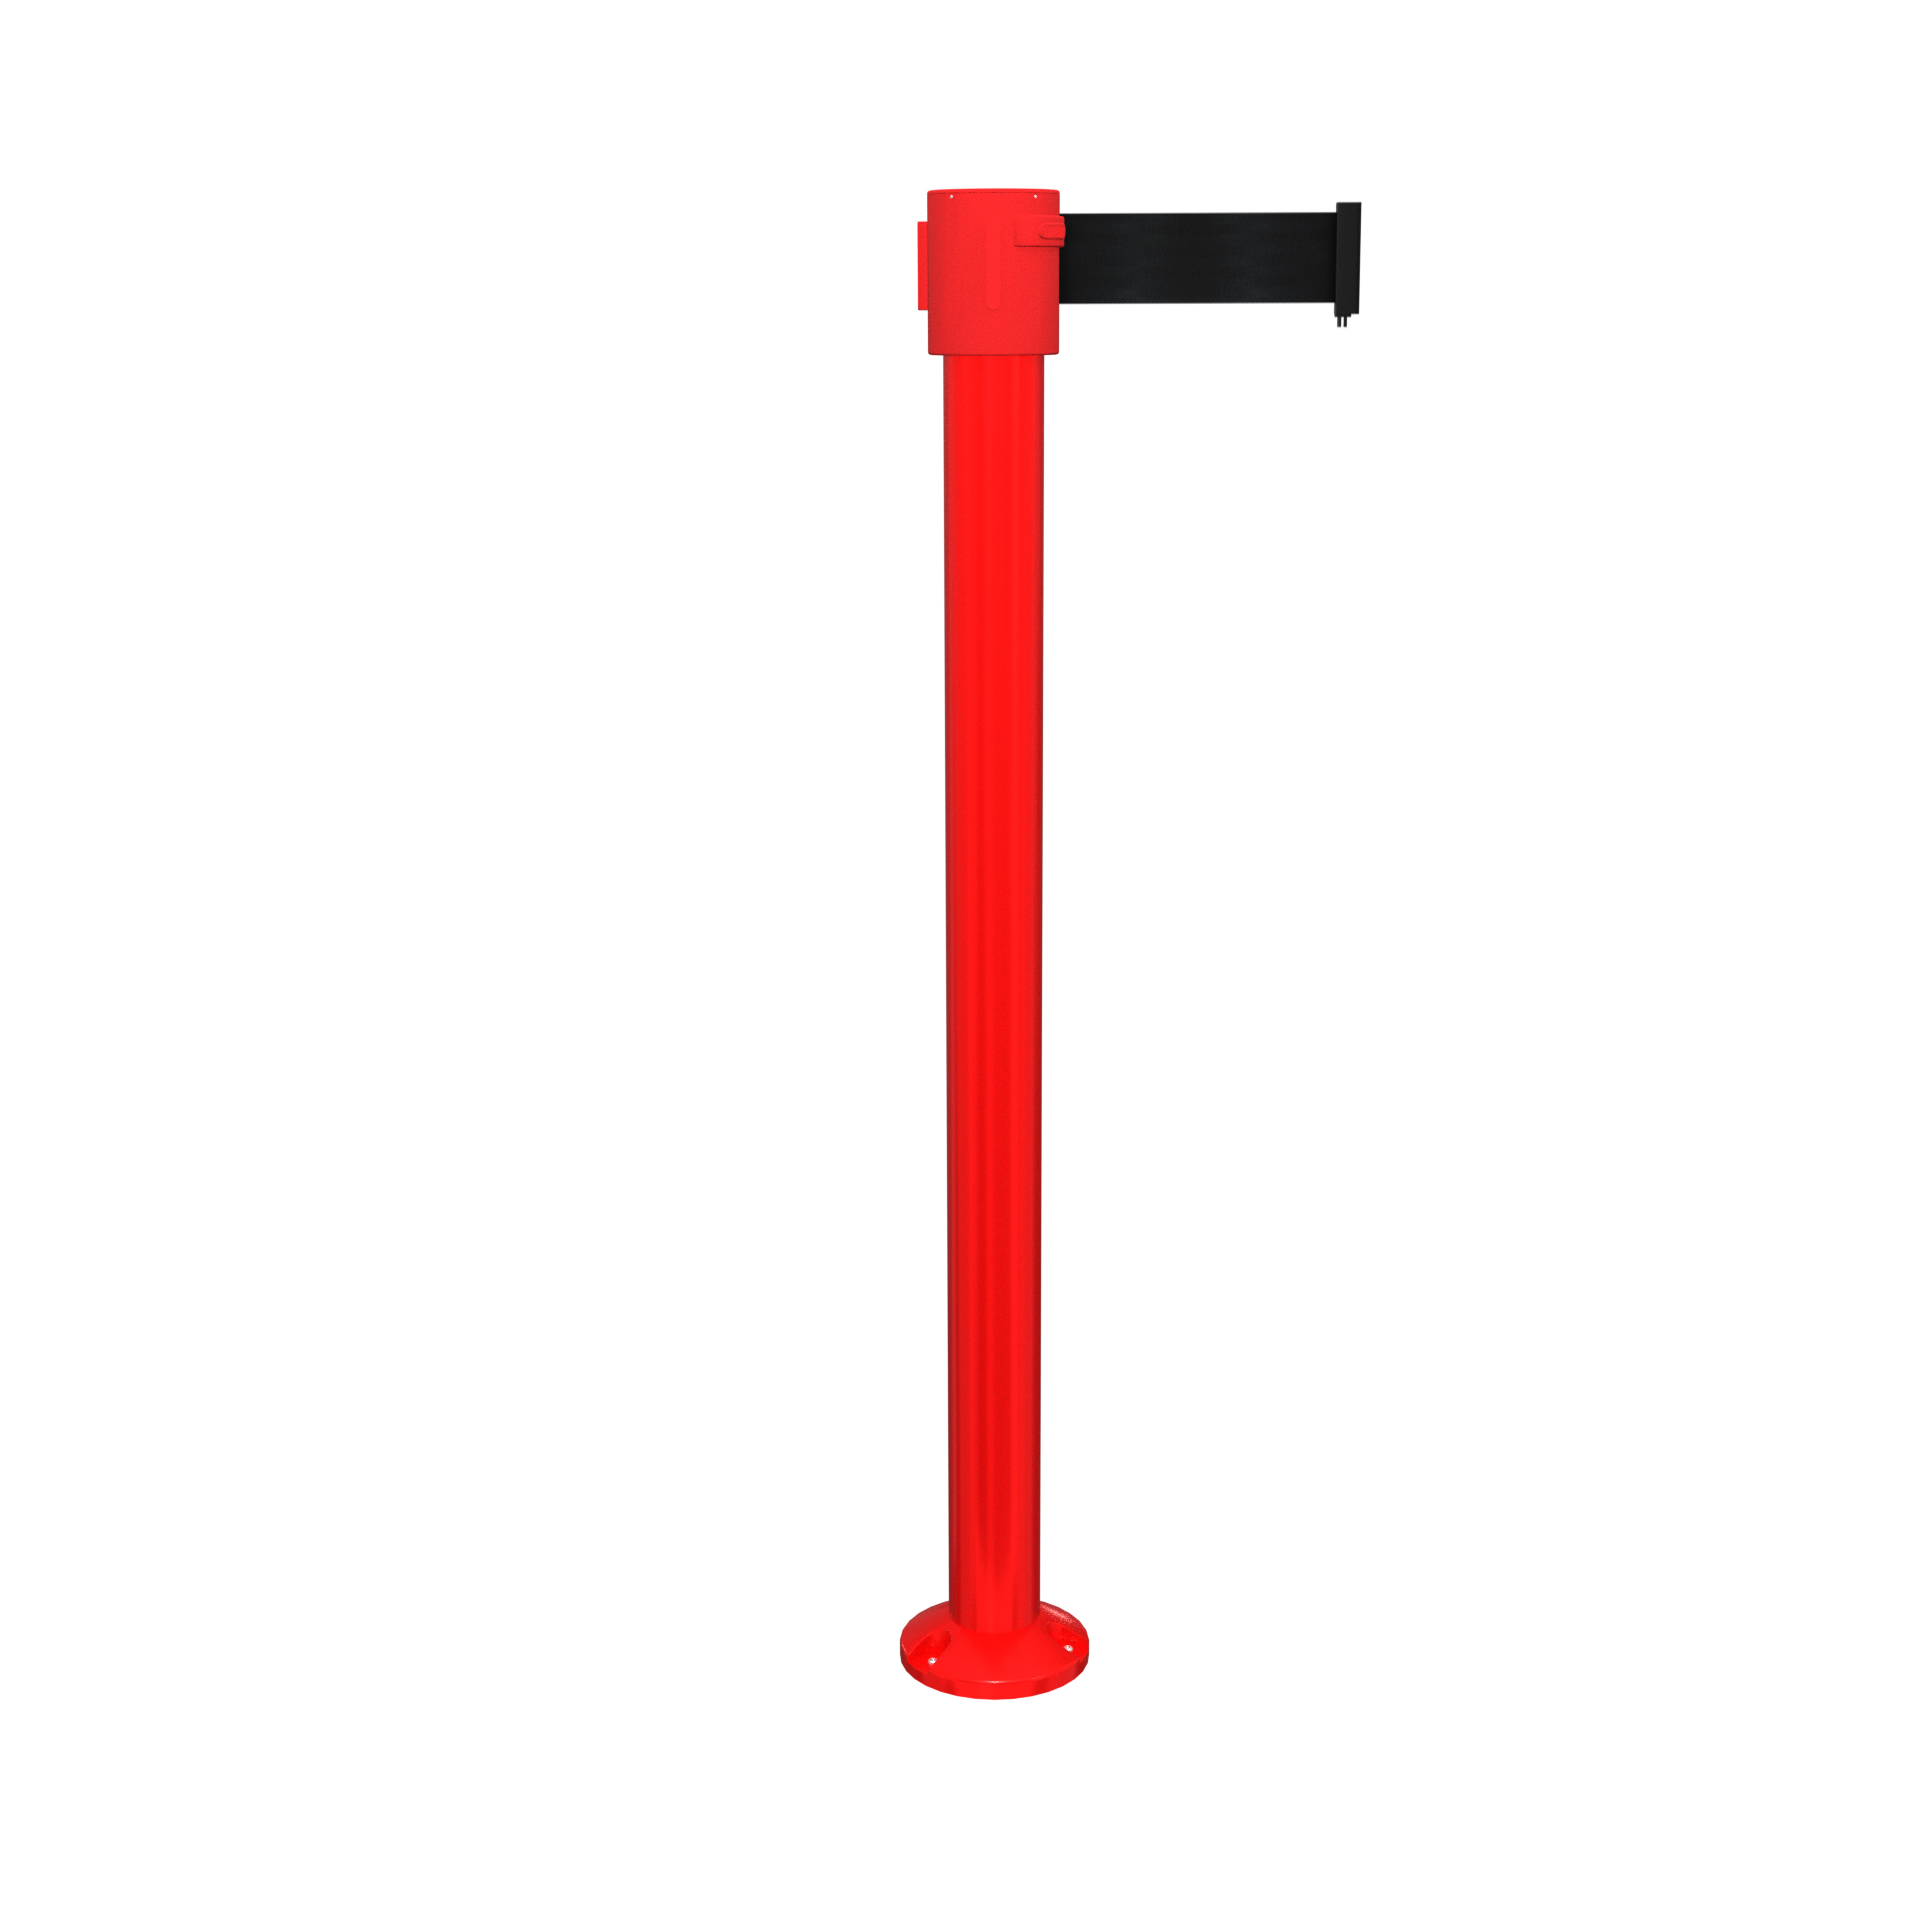 Red SafetyPro 335 Fixed Retractable Belt Barrier